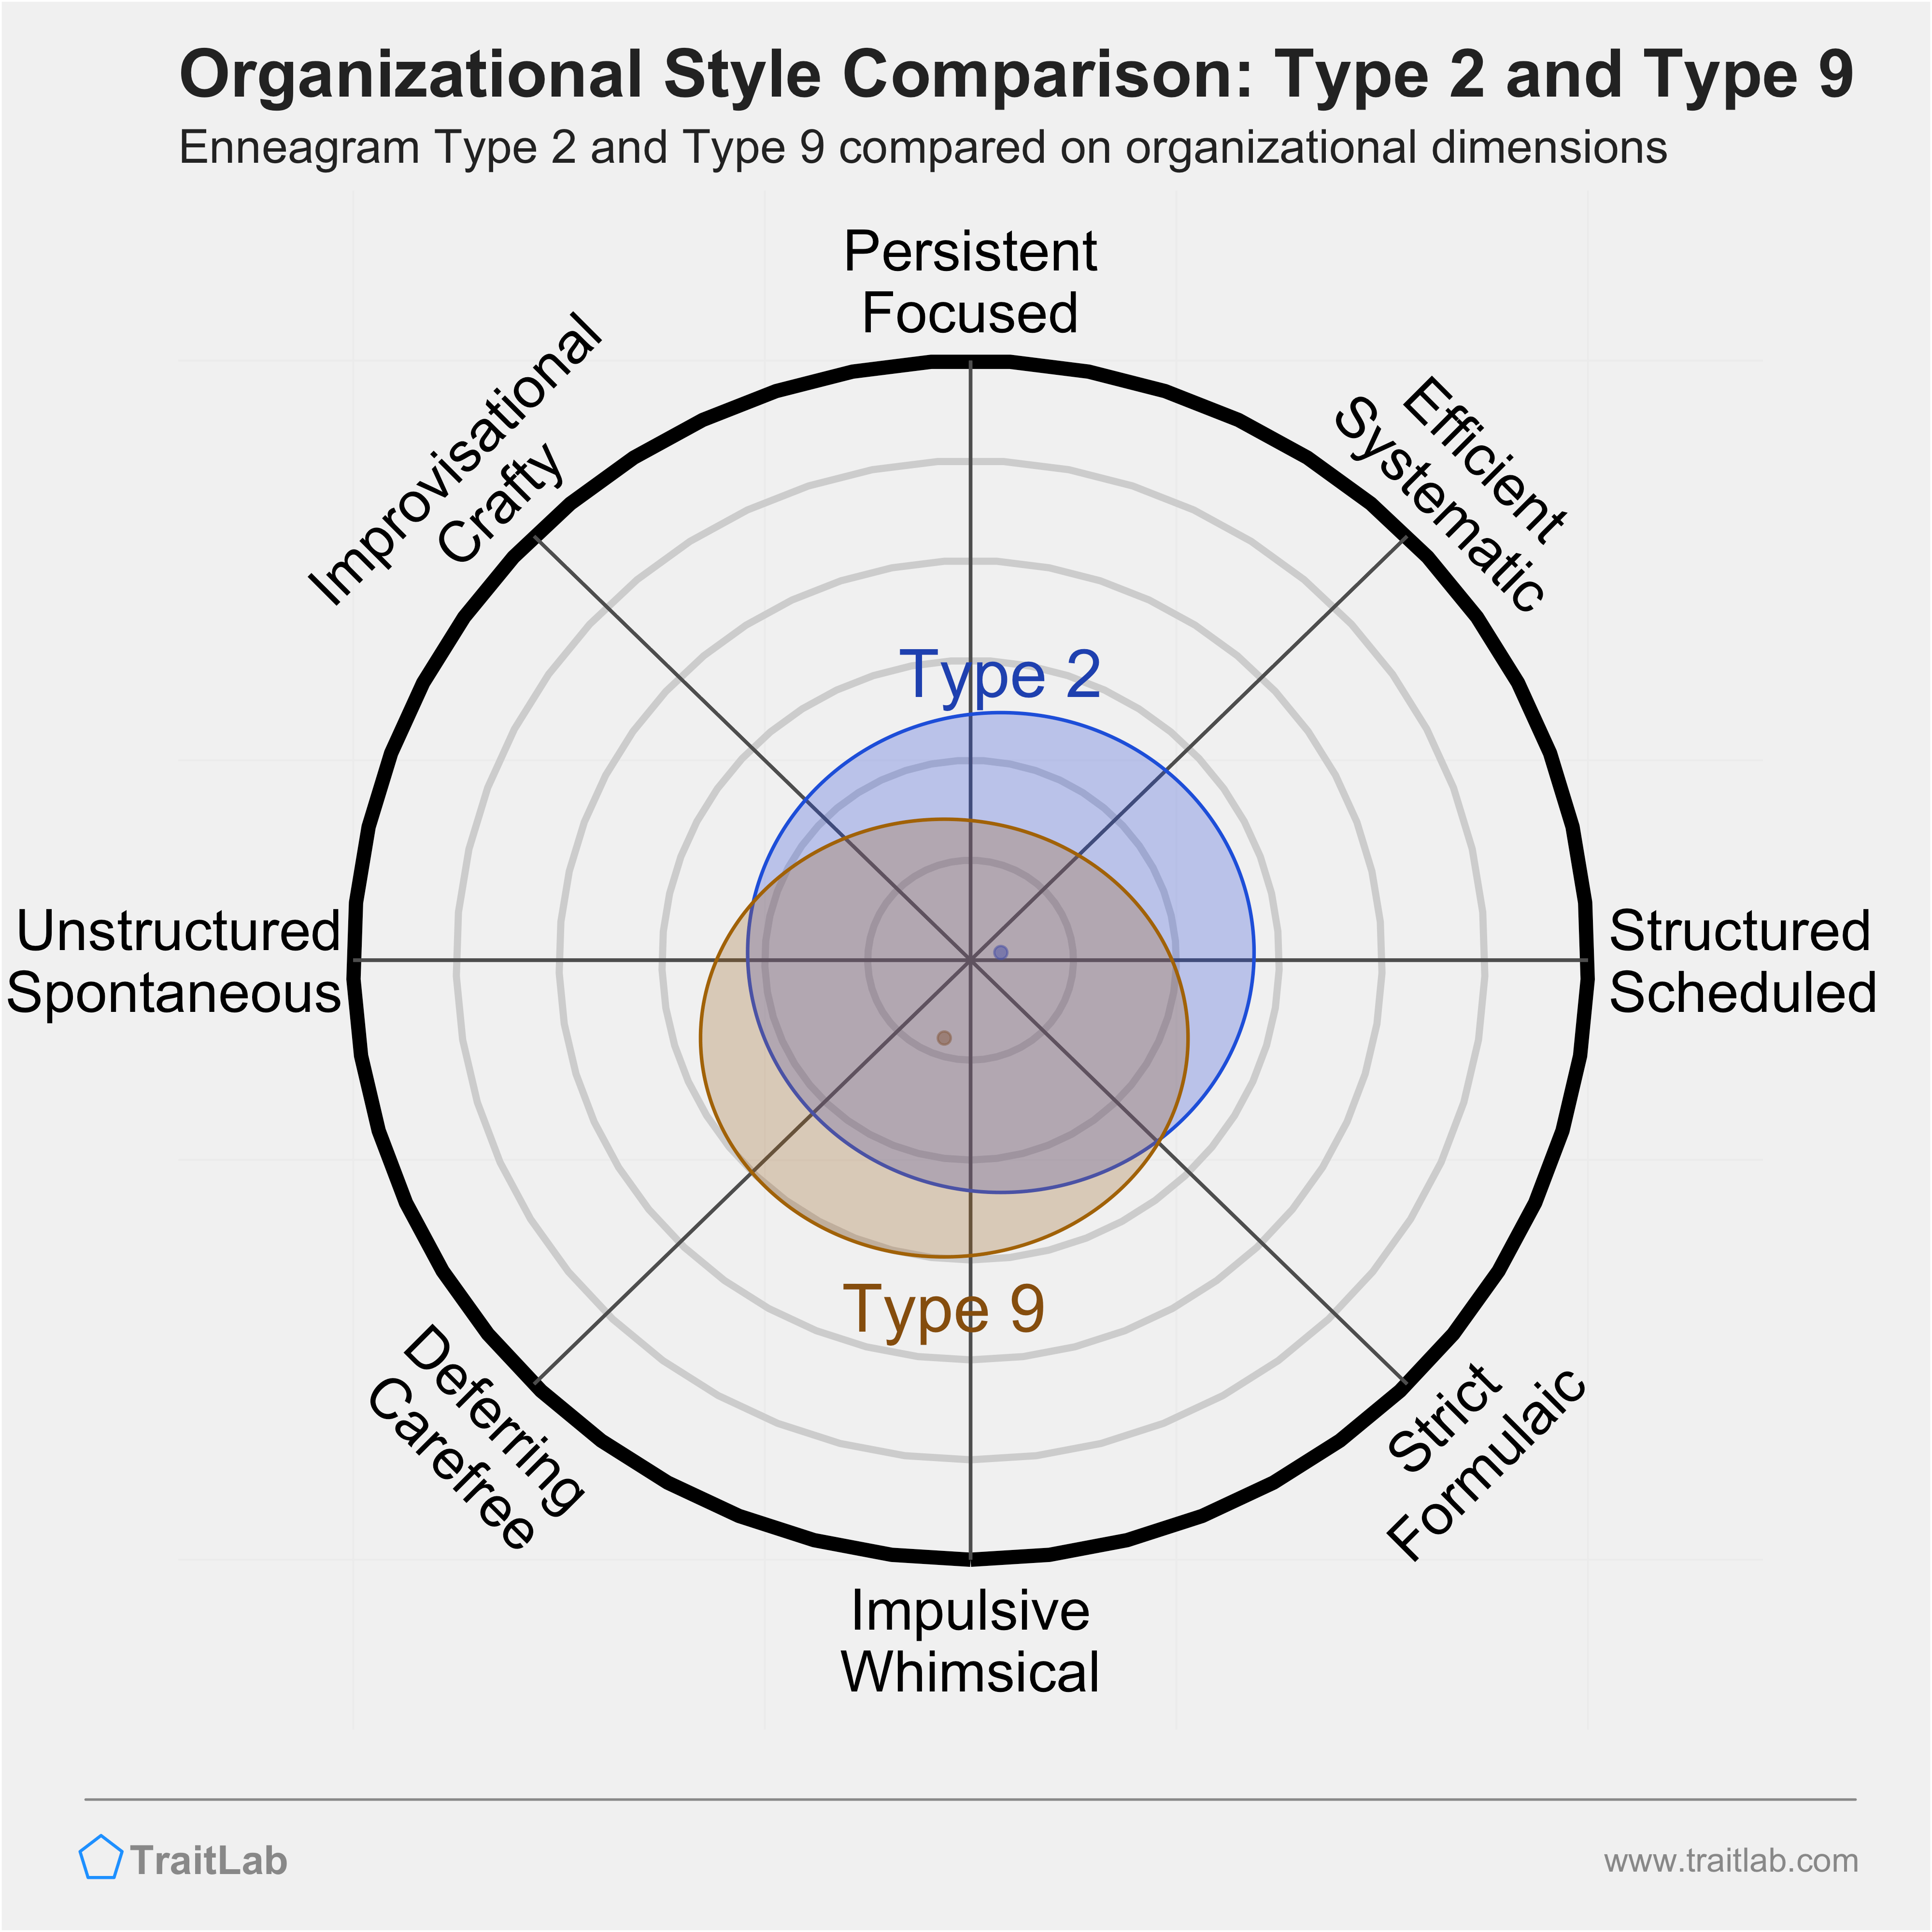 Type 2 and Type 9 comparison across organizational dimensions